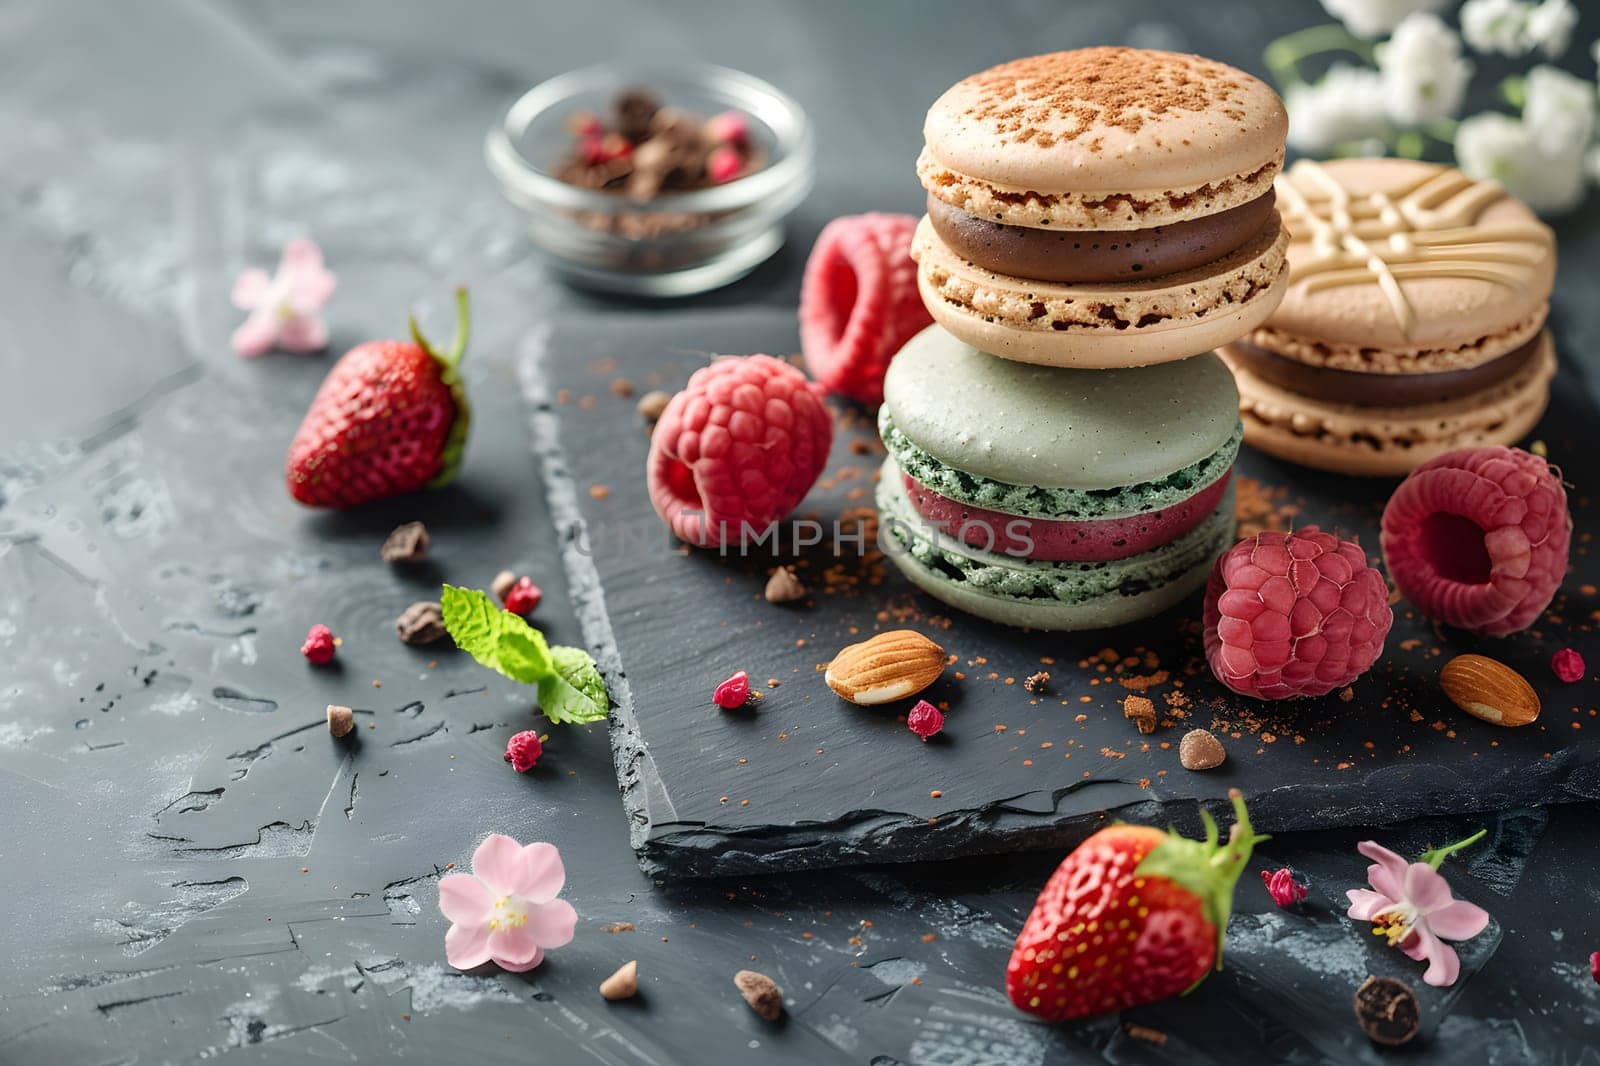 A stack of delicious macarons topped with fresh strawberries and raspberries, beautifully presented on a slate cutting board